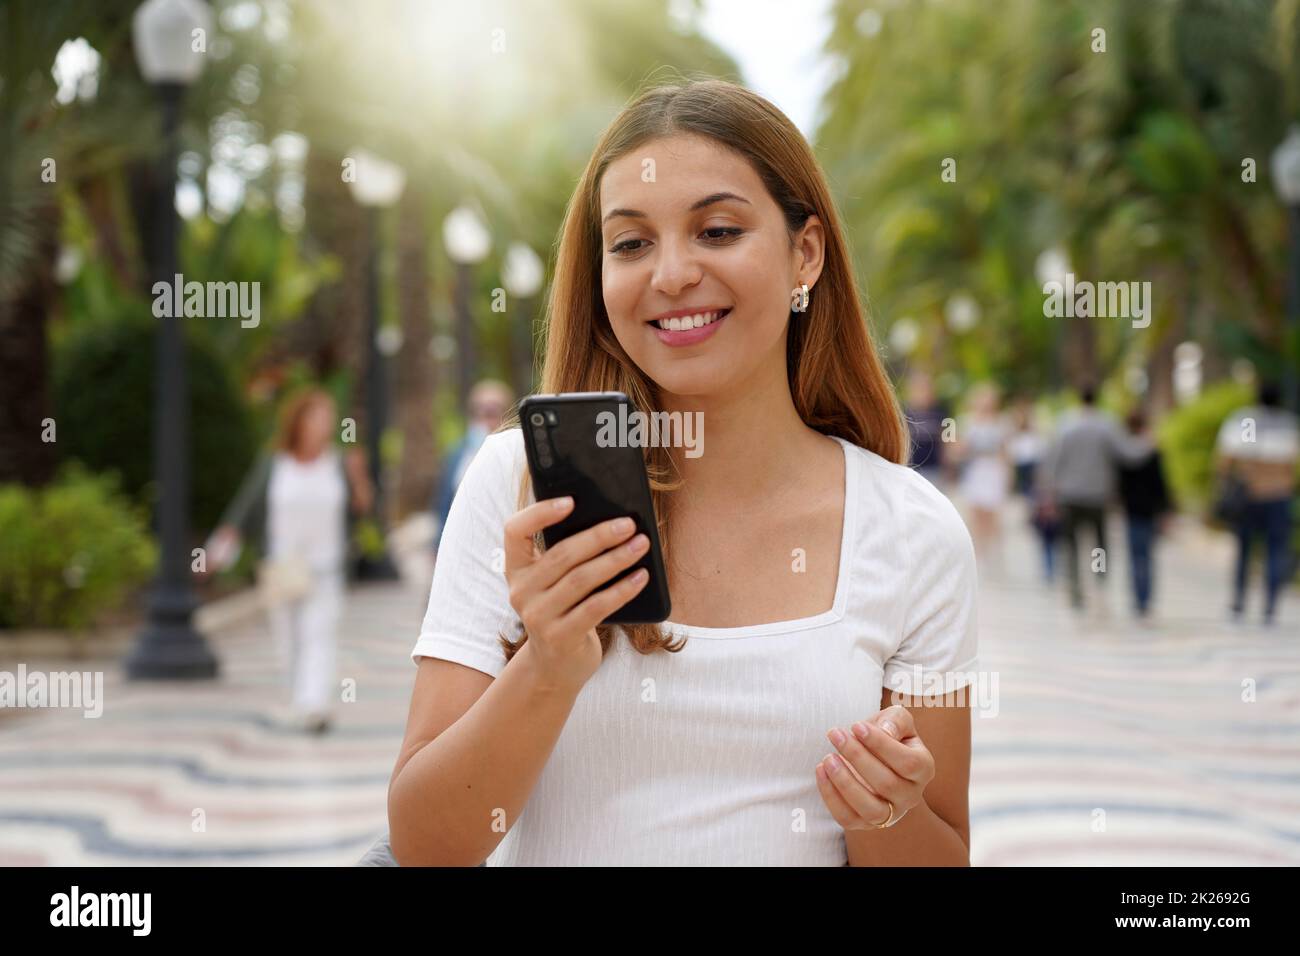 Excited young woman watching her smartphone when walking in the street with blurred people on the background. Millennial girl using mobile app outdoors. Teenager lifestyle technology concept. Stock Photo